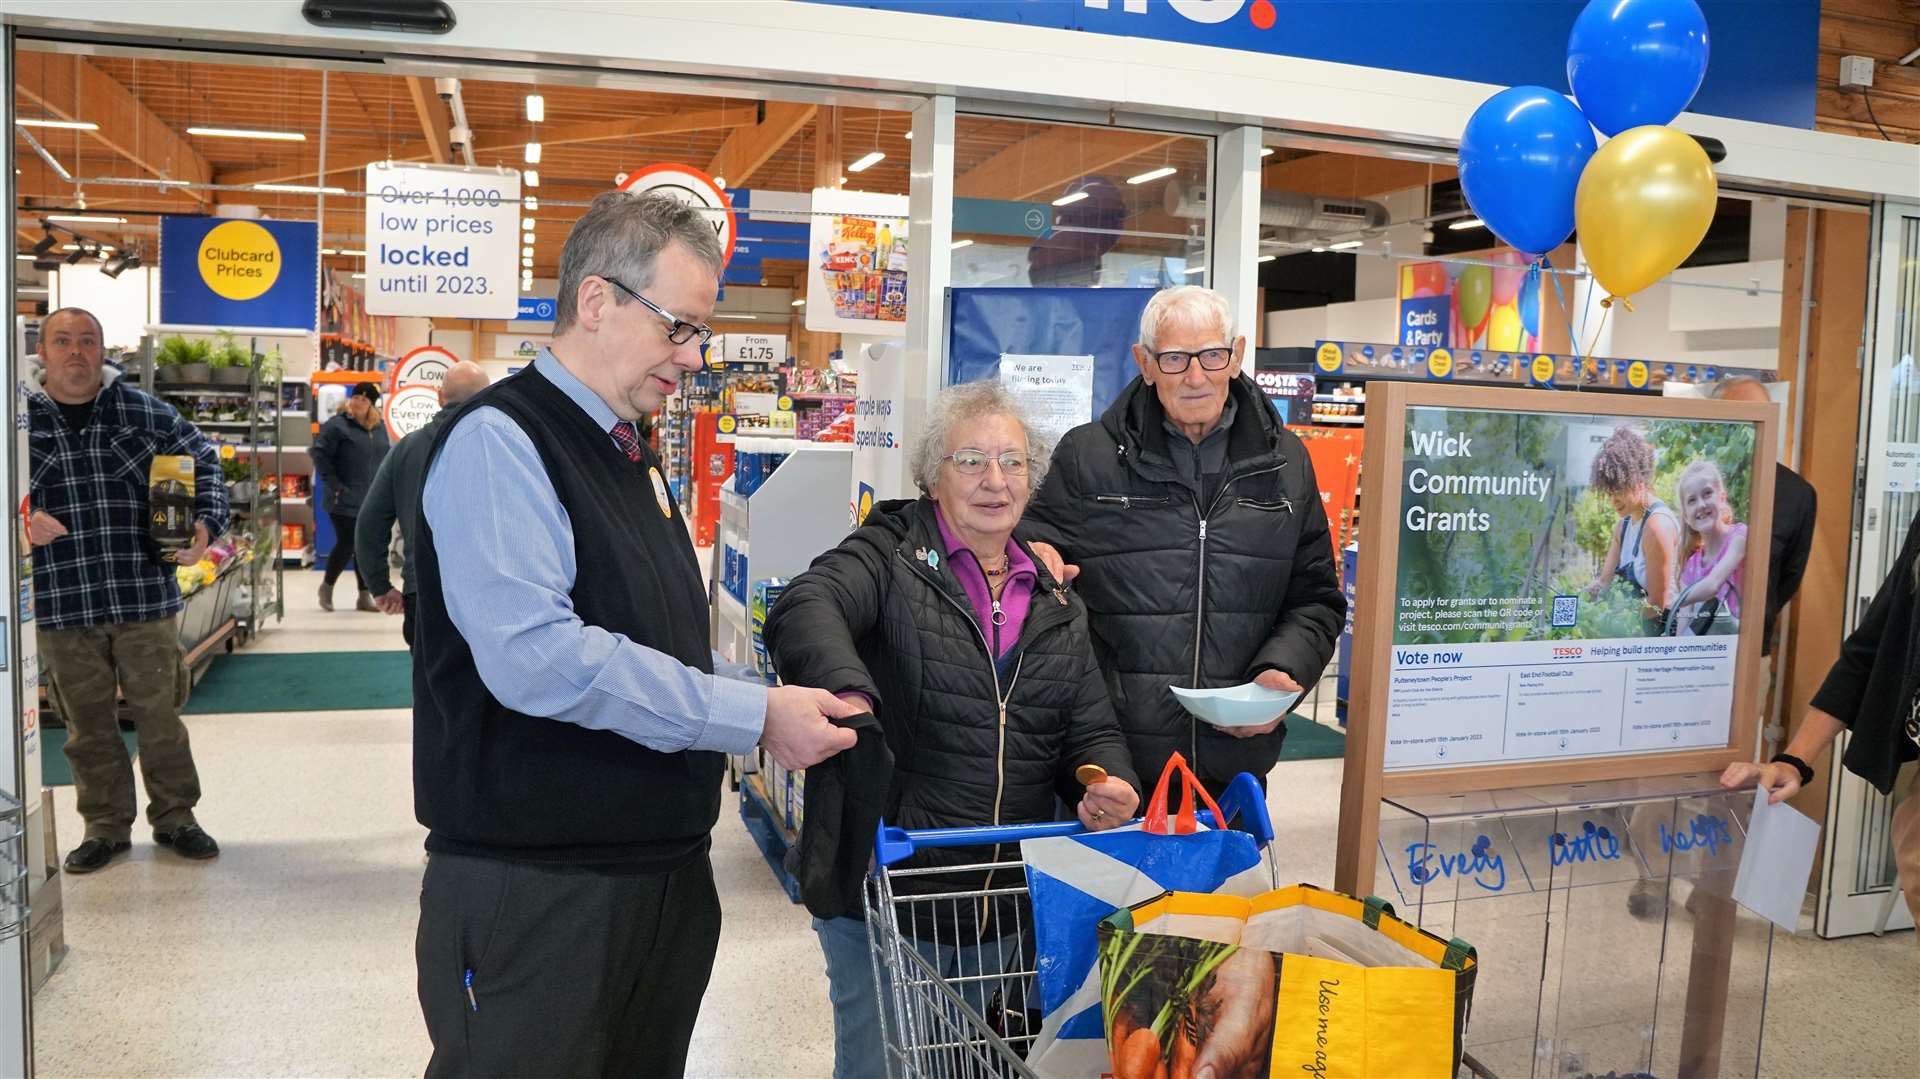 Jane McCarthy from Bower puts her hand in the bag to try and find the elusive golden token. On the left is Billy Duchart who is Tesco Wick's senior fresh manager and at right is Denny Swanson who was helping at the event. Picture: DGS